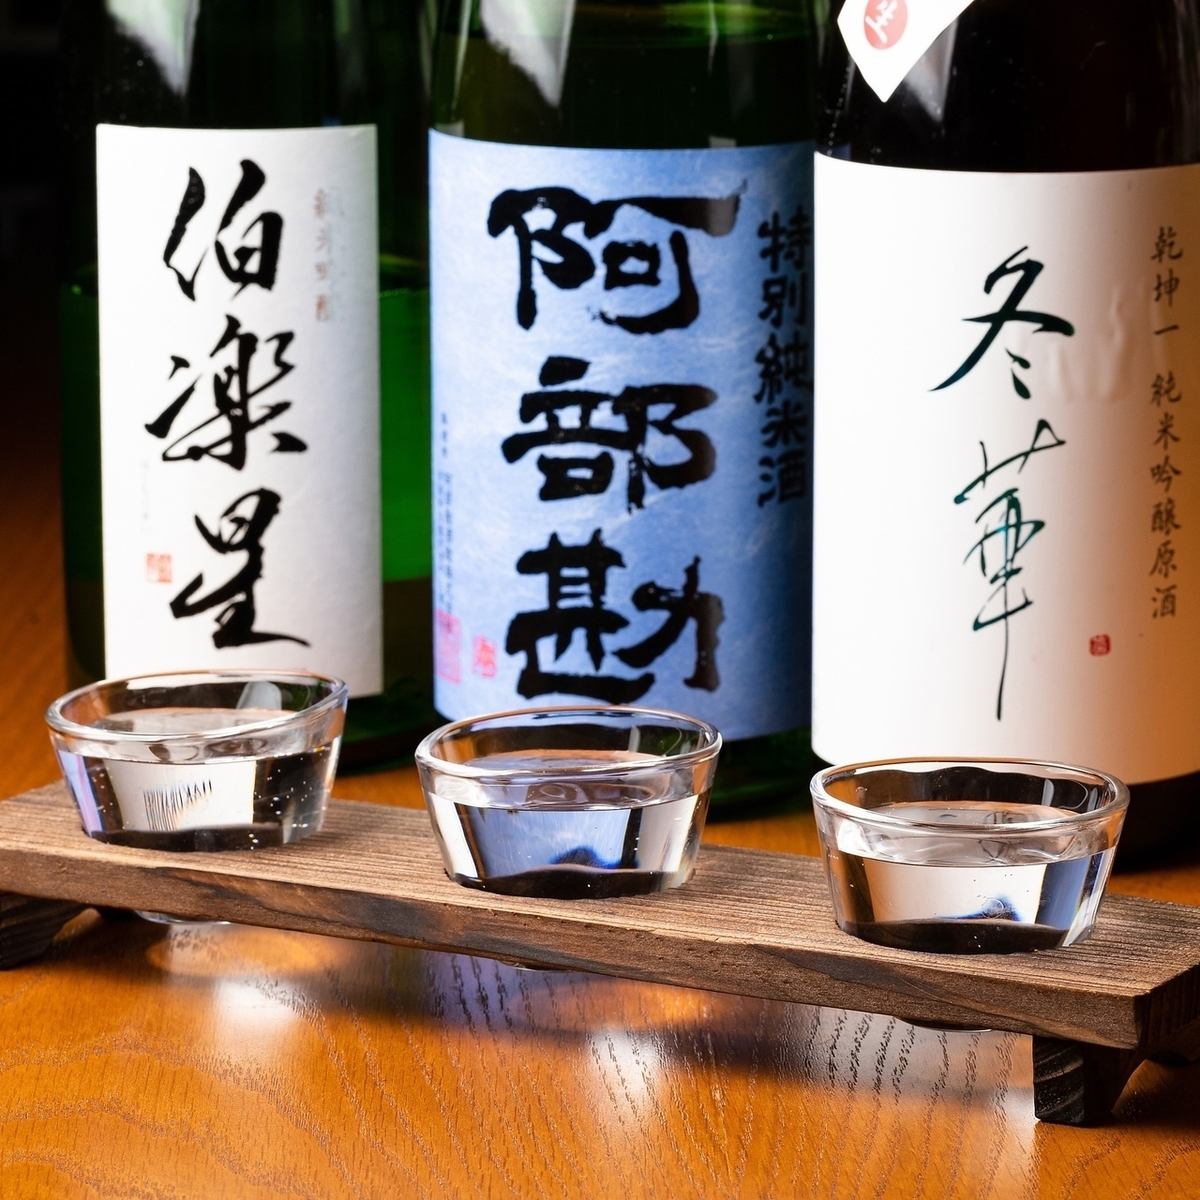 We have a variety of sake and shochu.Come to our store for a banquet!